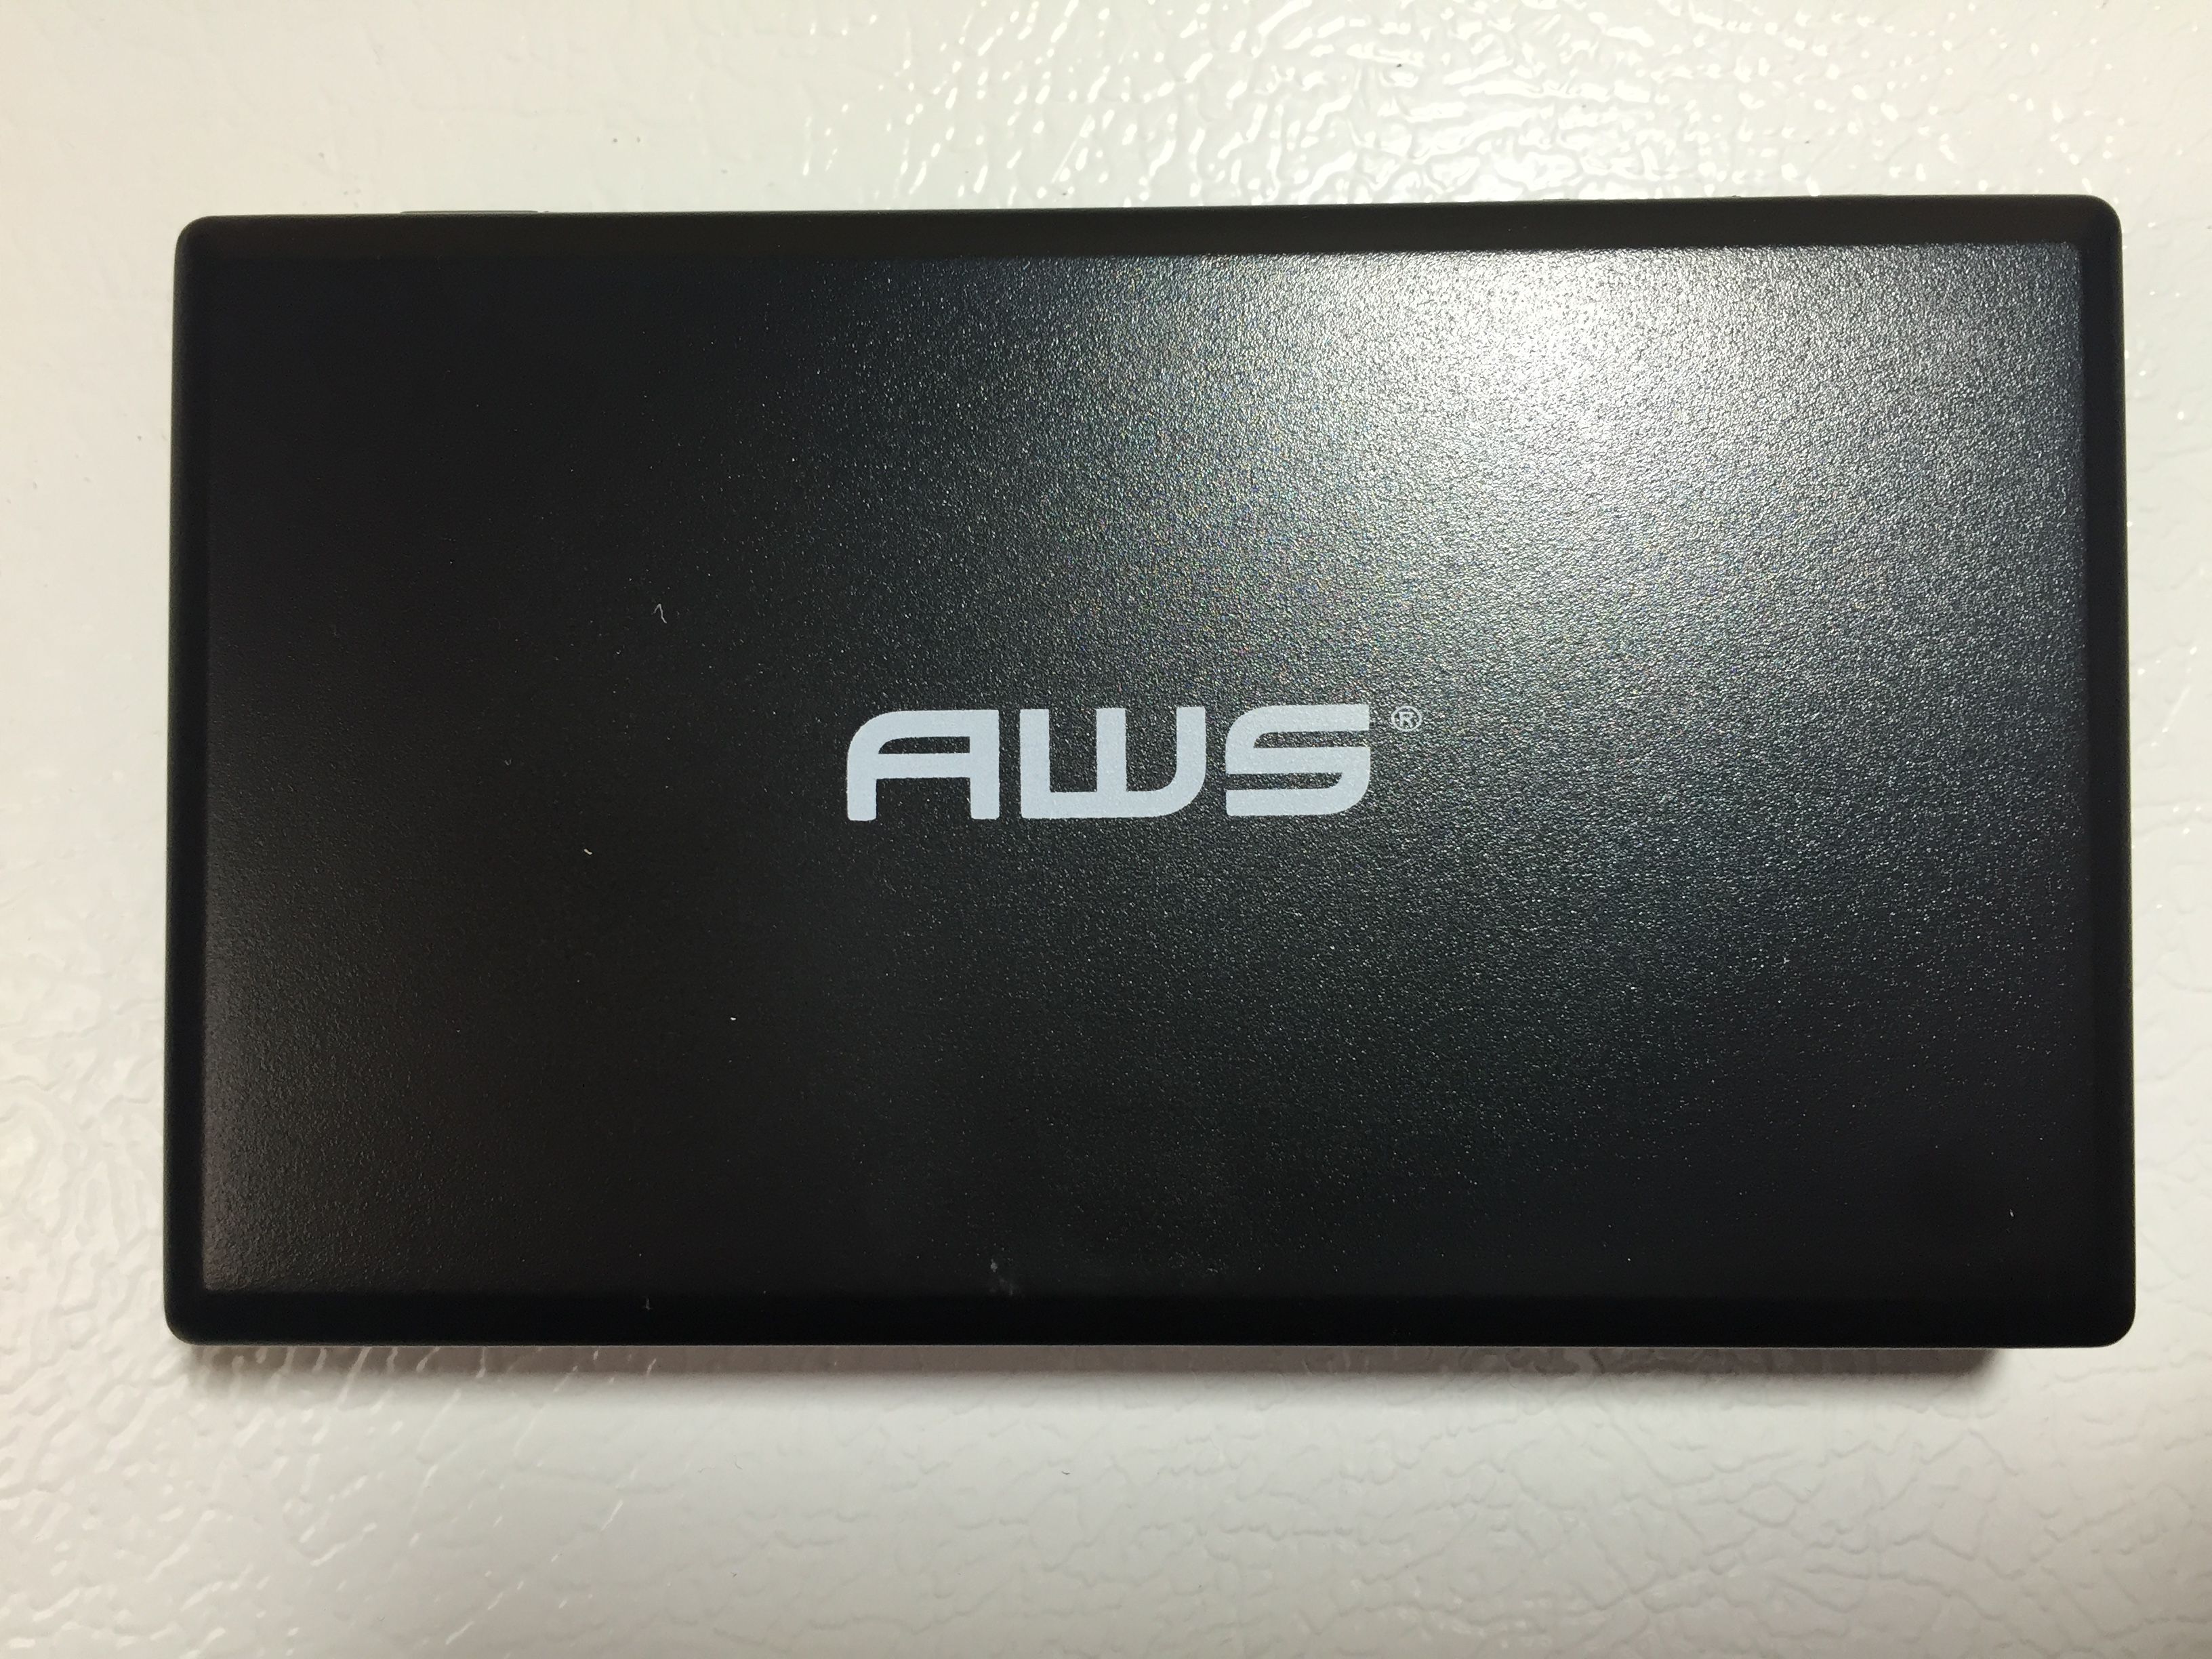 Hands On Review: American Weigh AWS-100 Digital Gram Scale – 100g